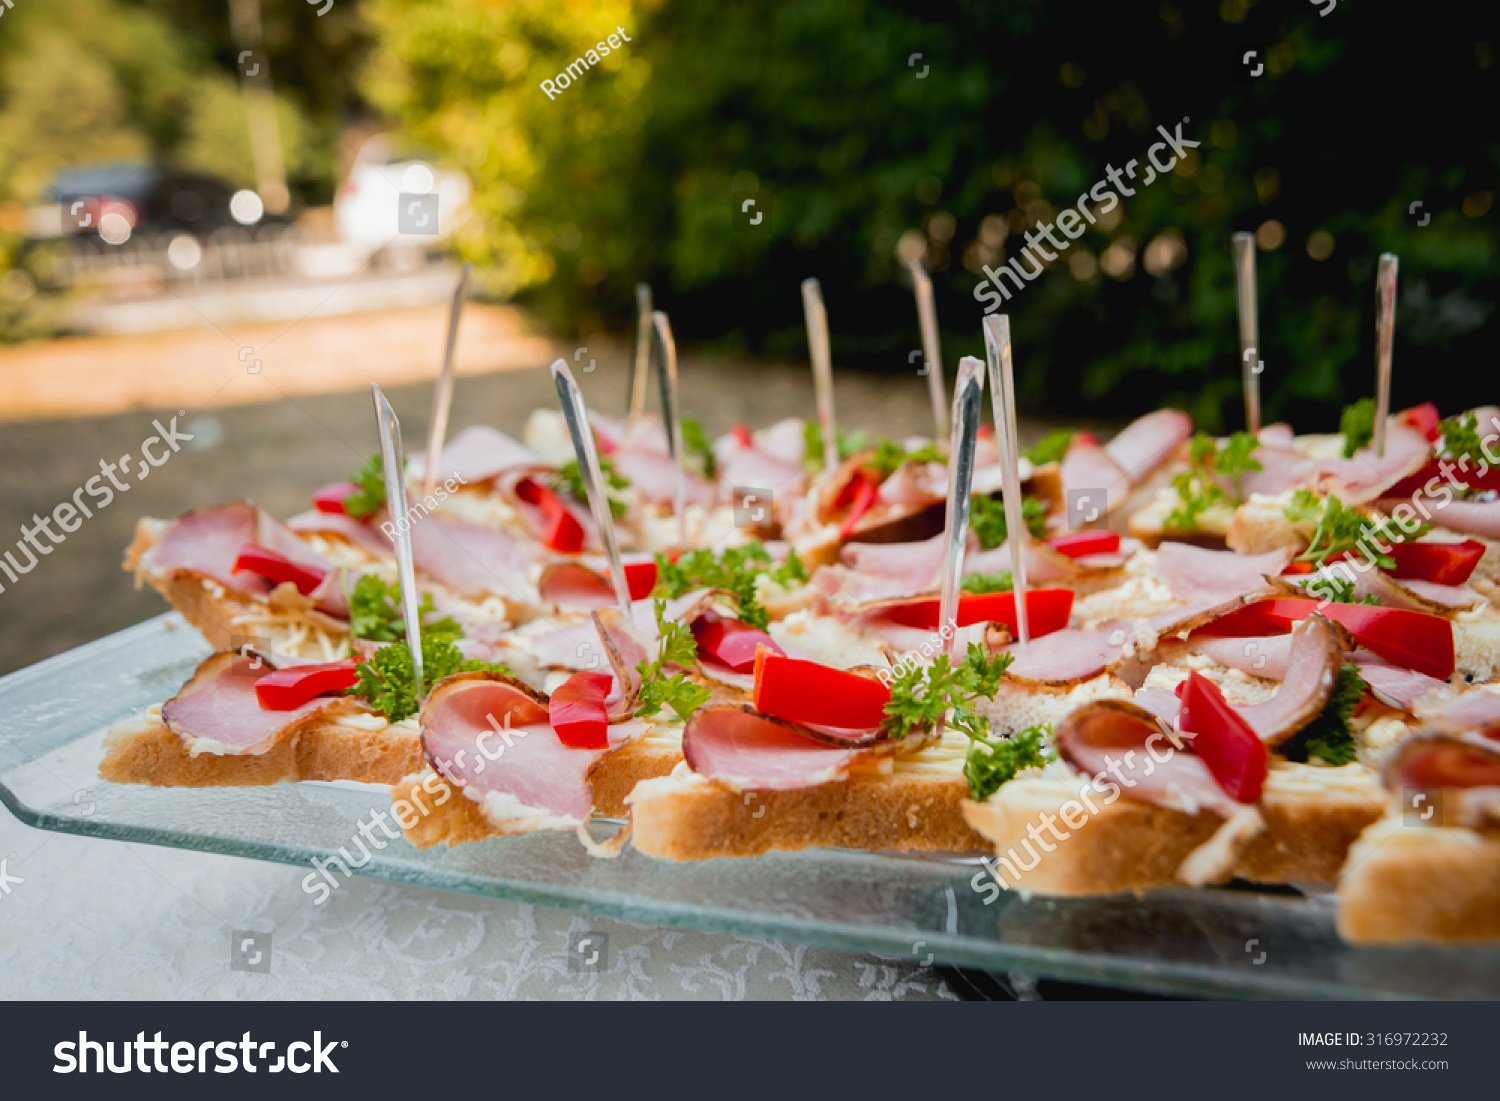 Sandwiches on a large plate. Catering. Restaurant #316972232